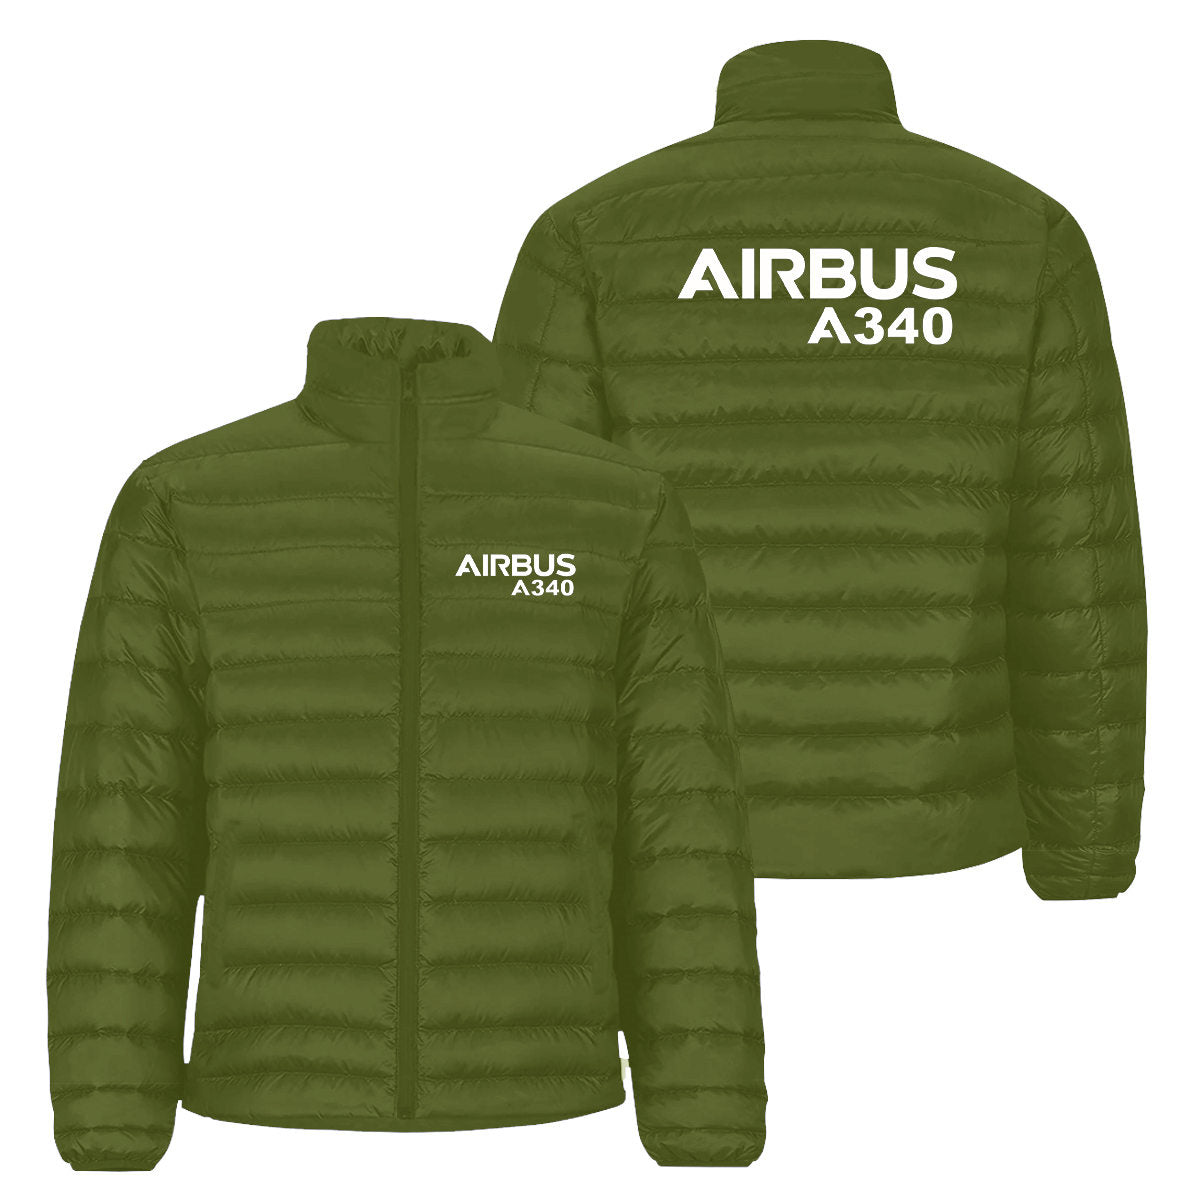 Airbus A340 & Text Designed Padded Jackets